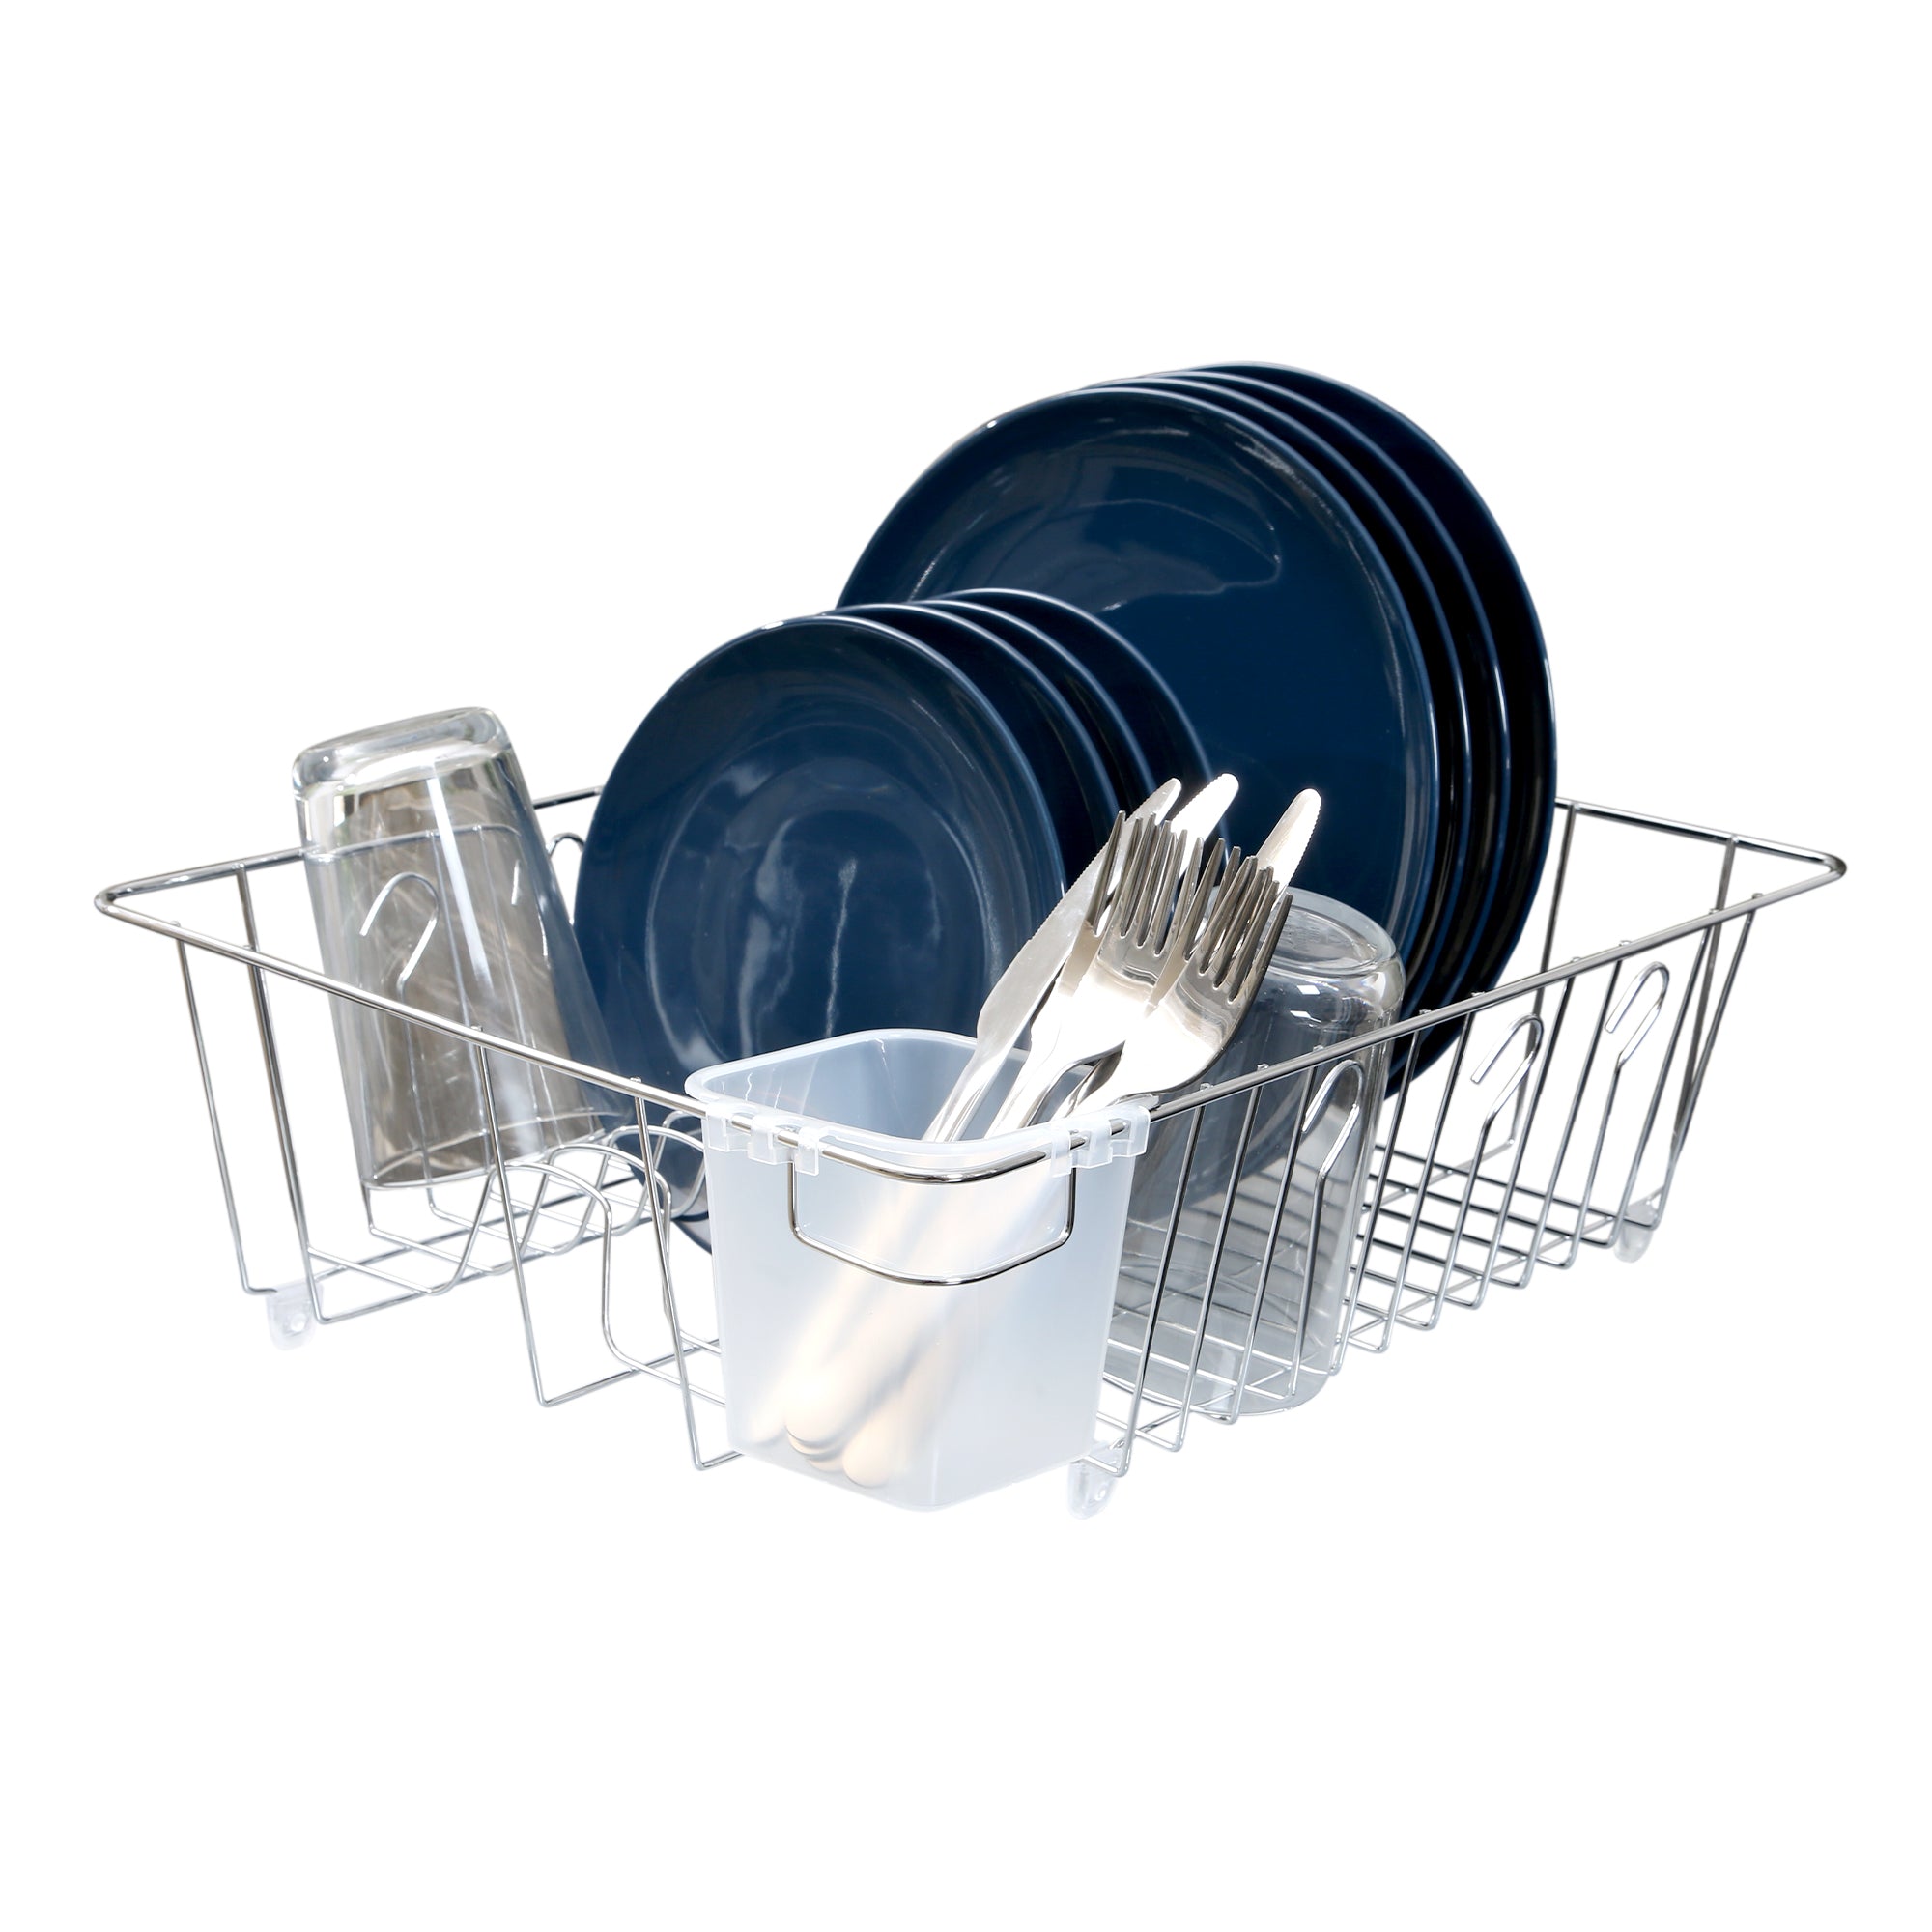 Dish Drainer Rack for In Sink or Counter Drying - Large - Smart Design® 7